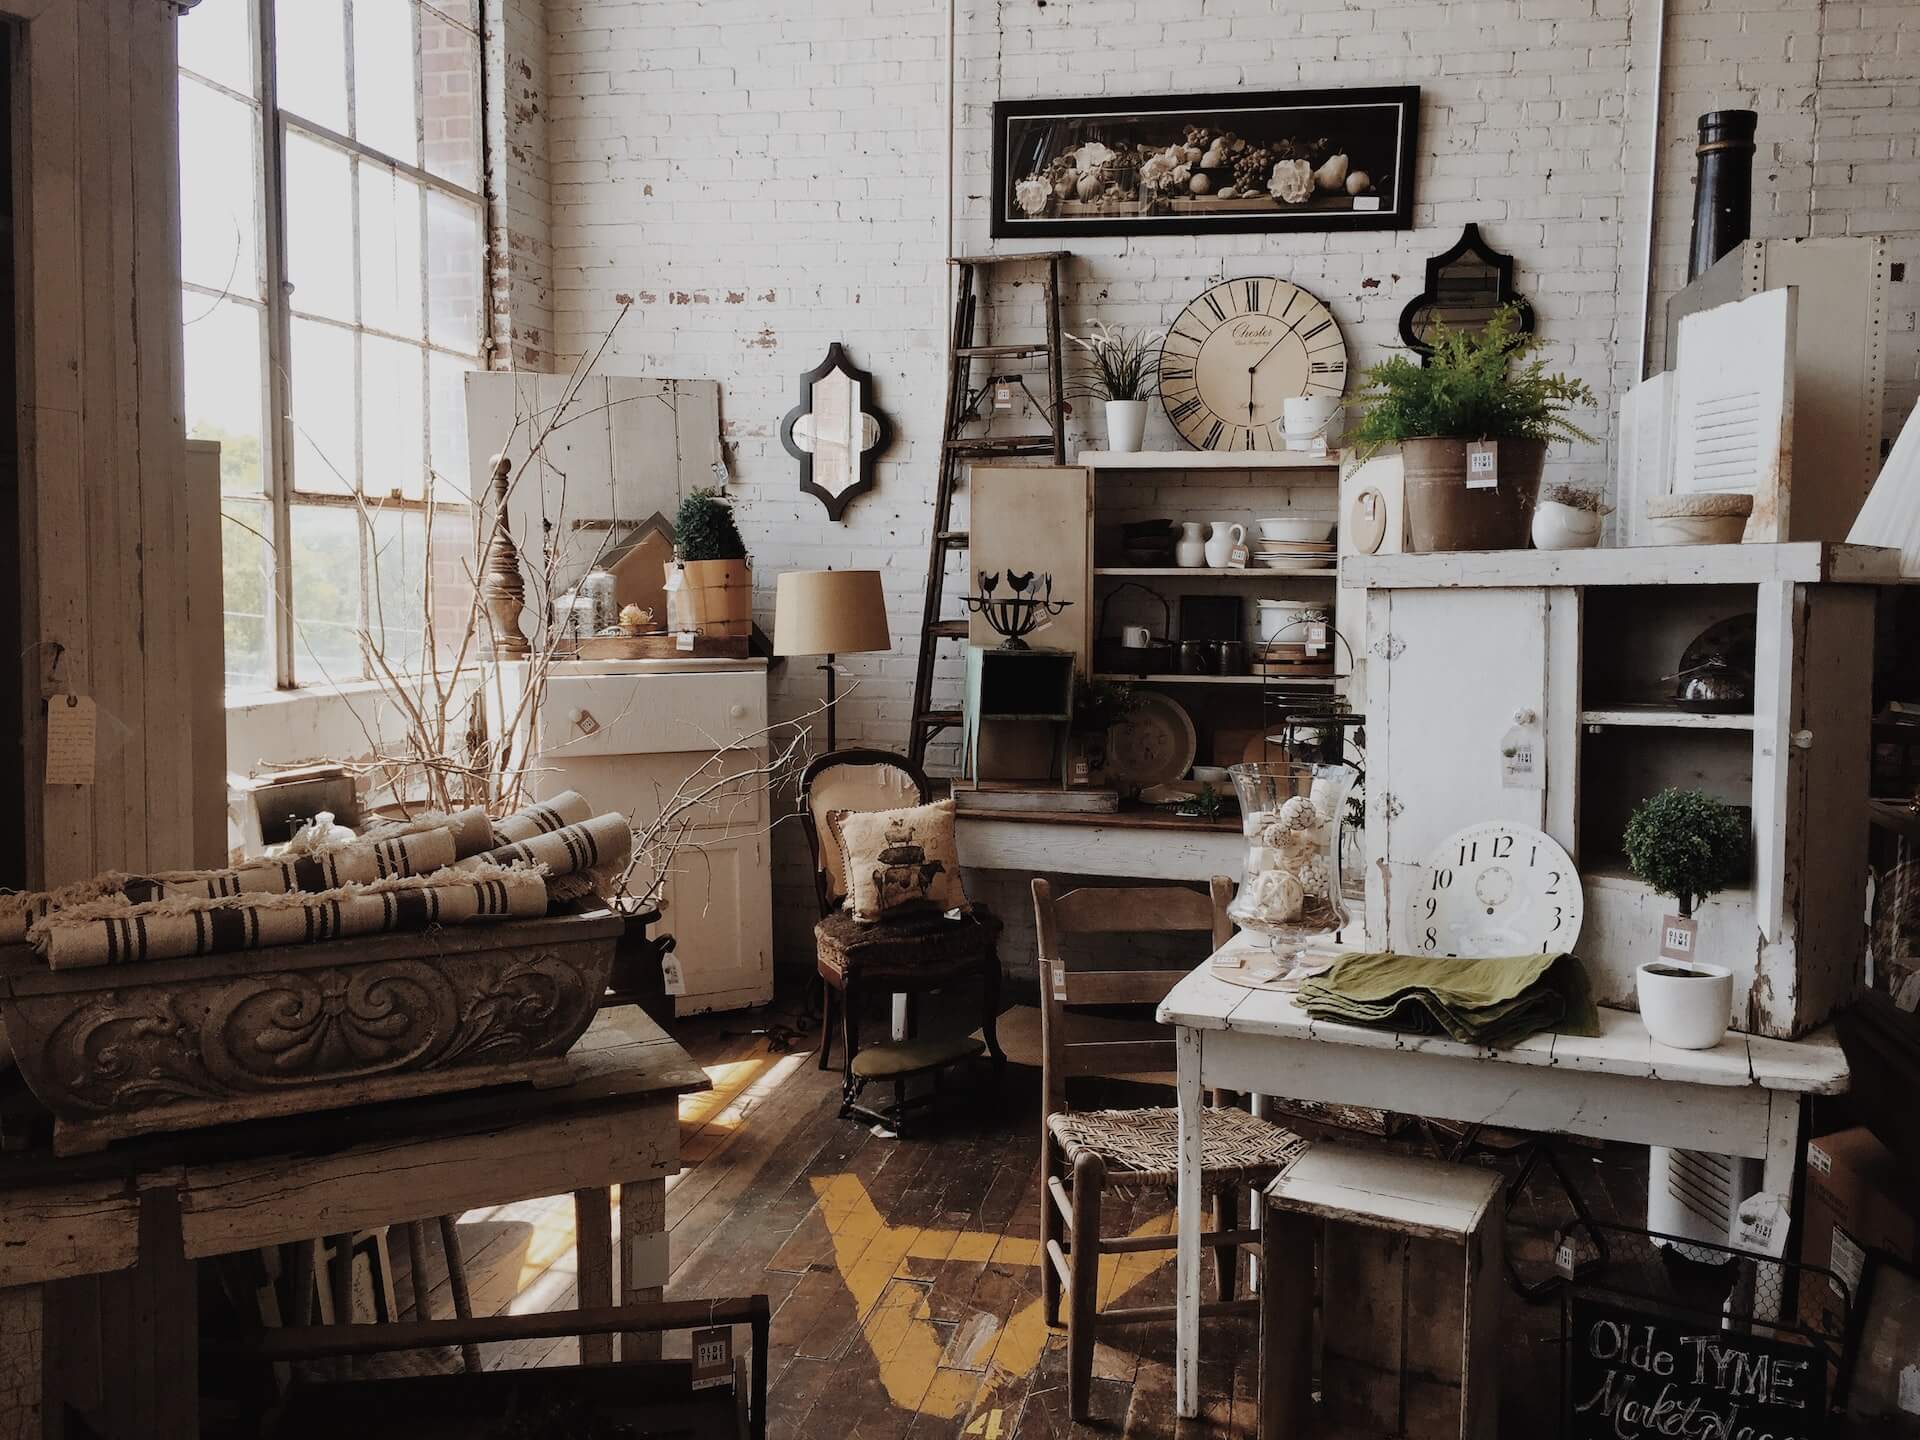 A bright room full of antiques